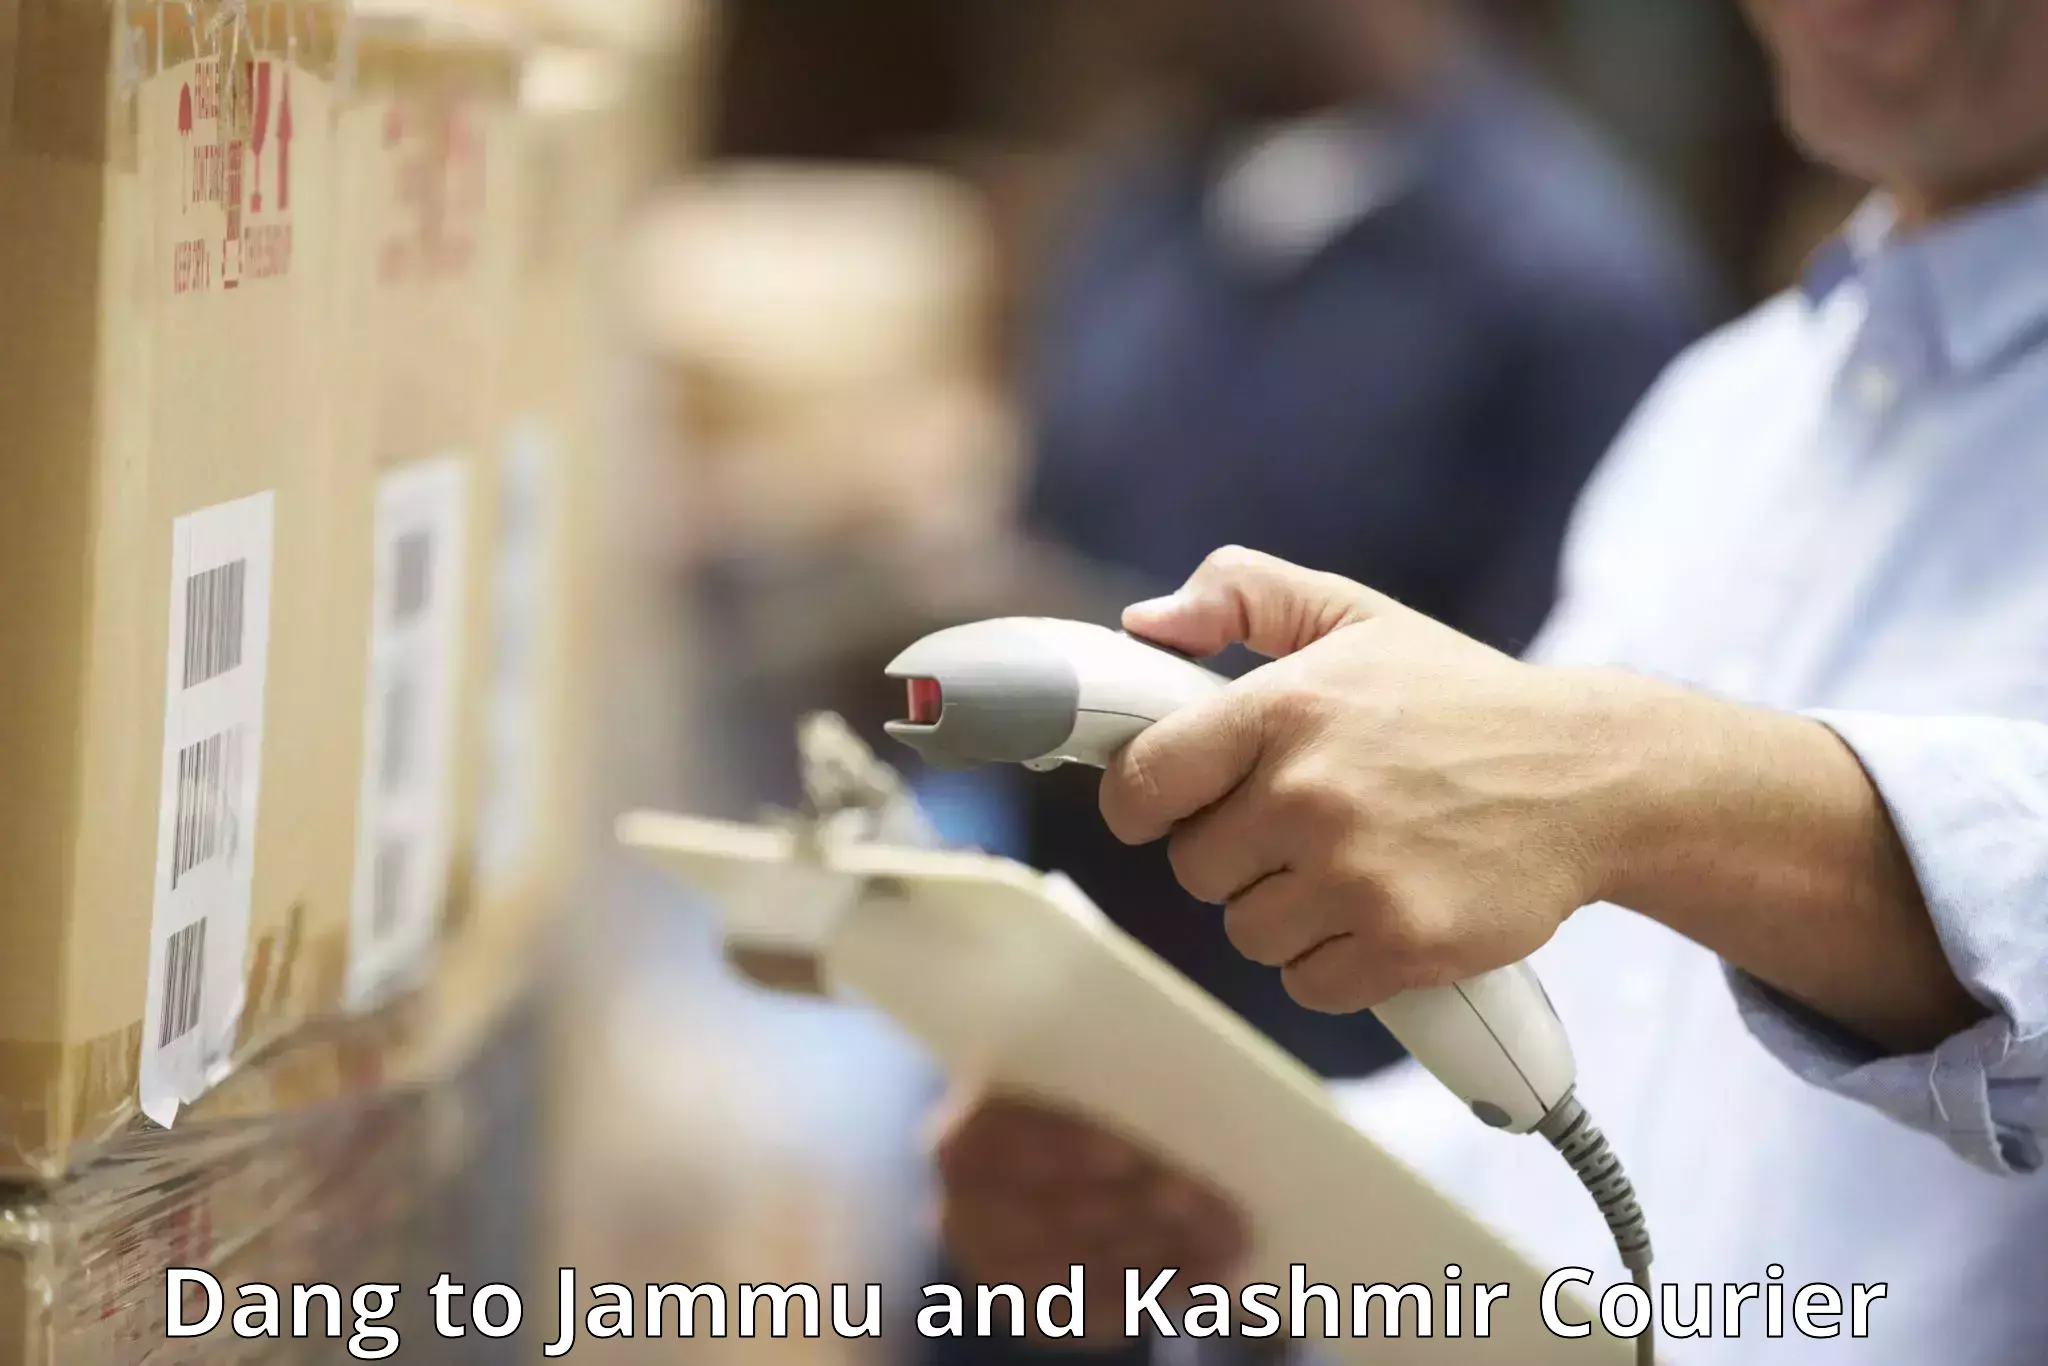 Luggage transport consultancy Dang to Jammu and Kashmir